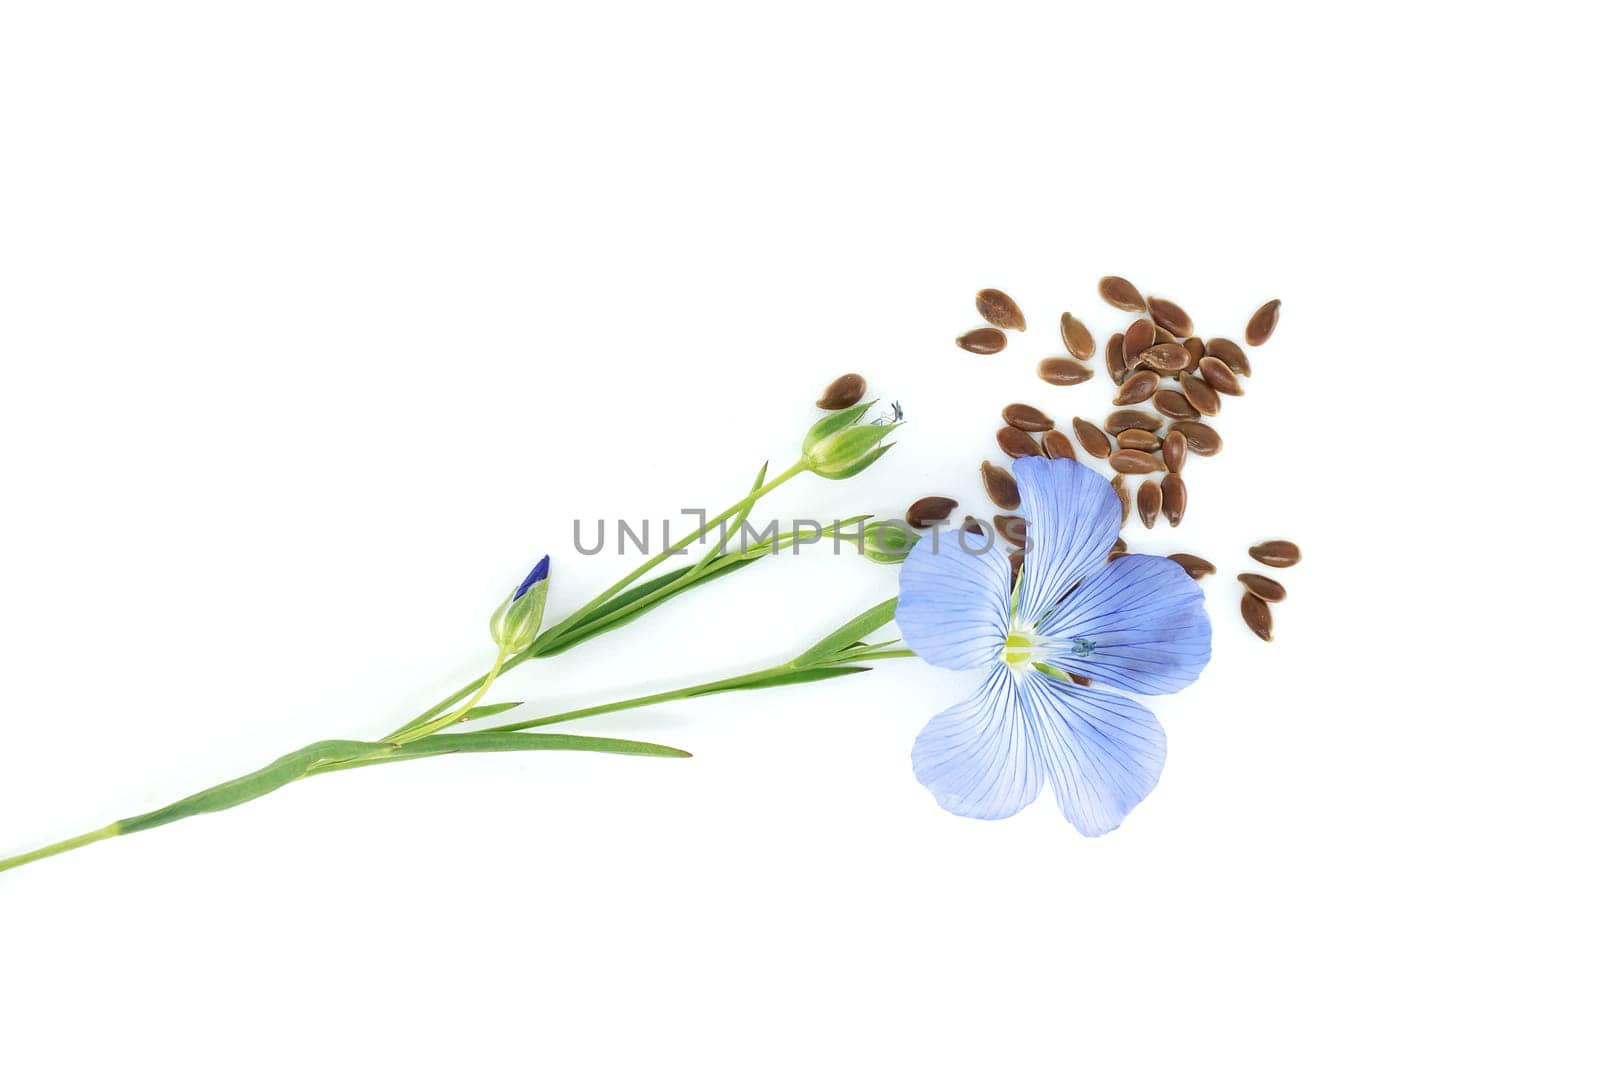 Common flax flowers, stalks and seeds isolated on white by NetPix